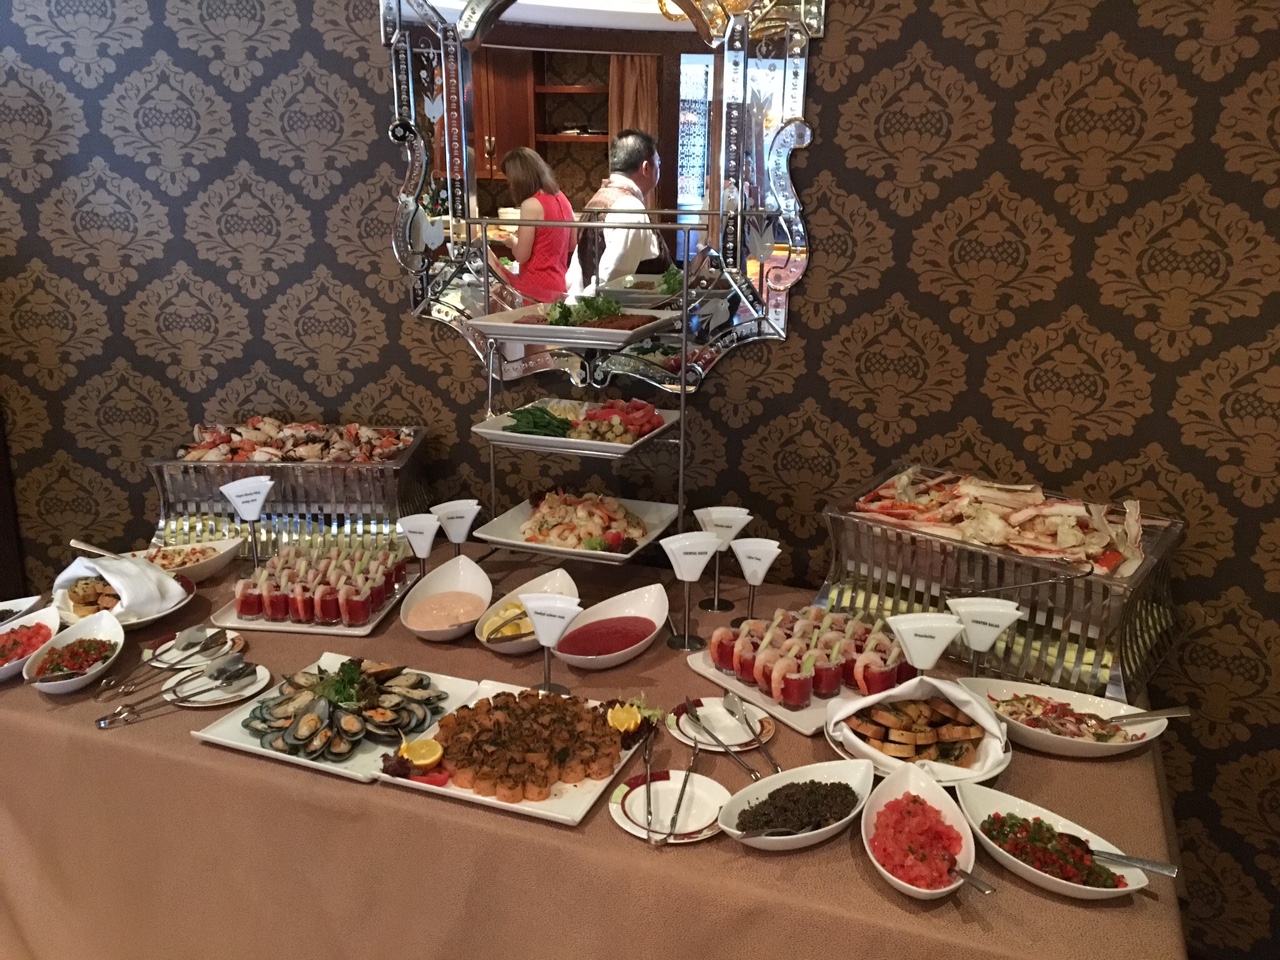 Buffet table at Palo Brunch